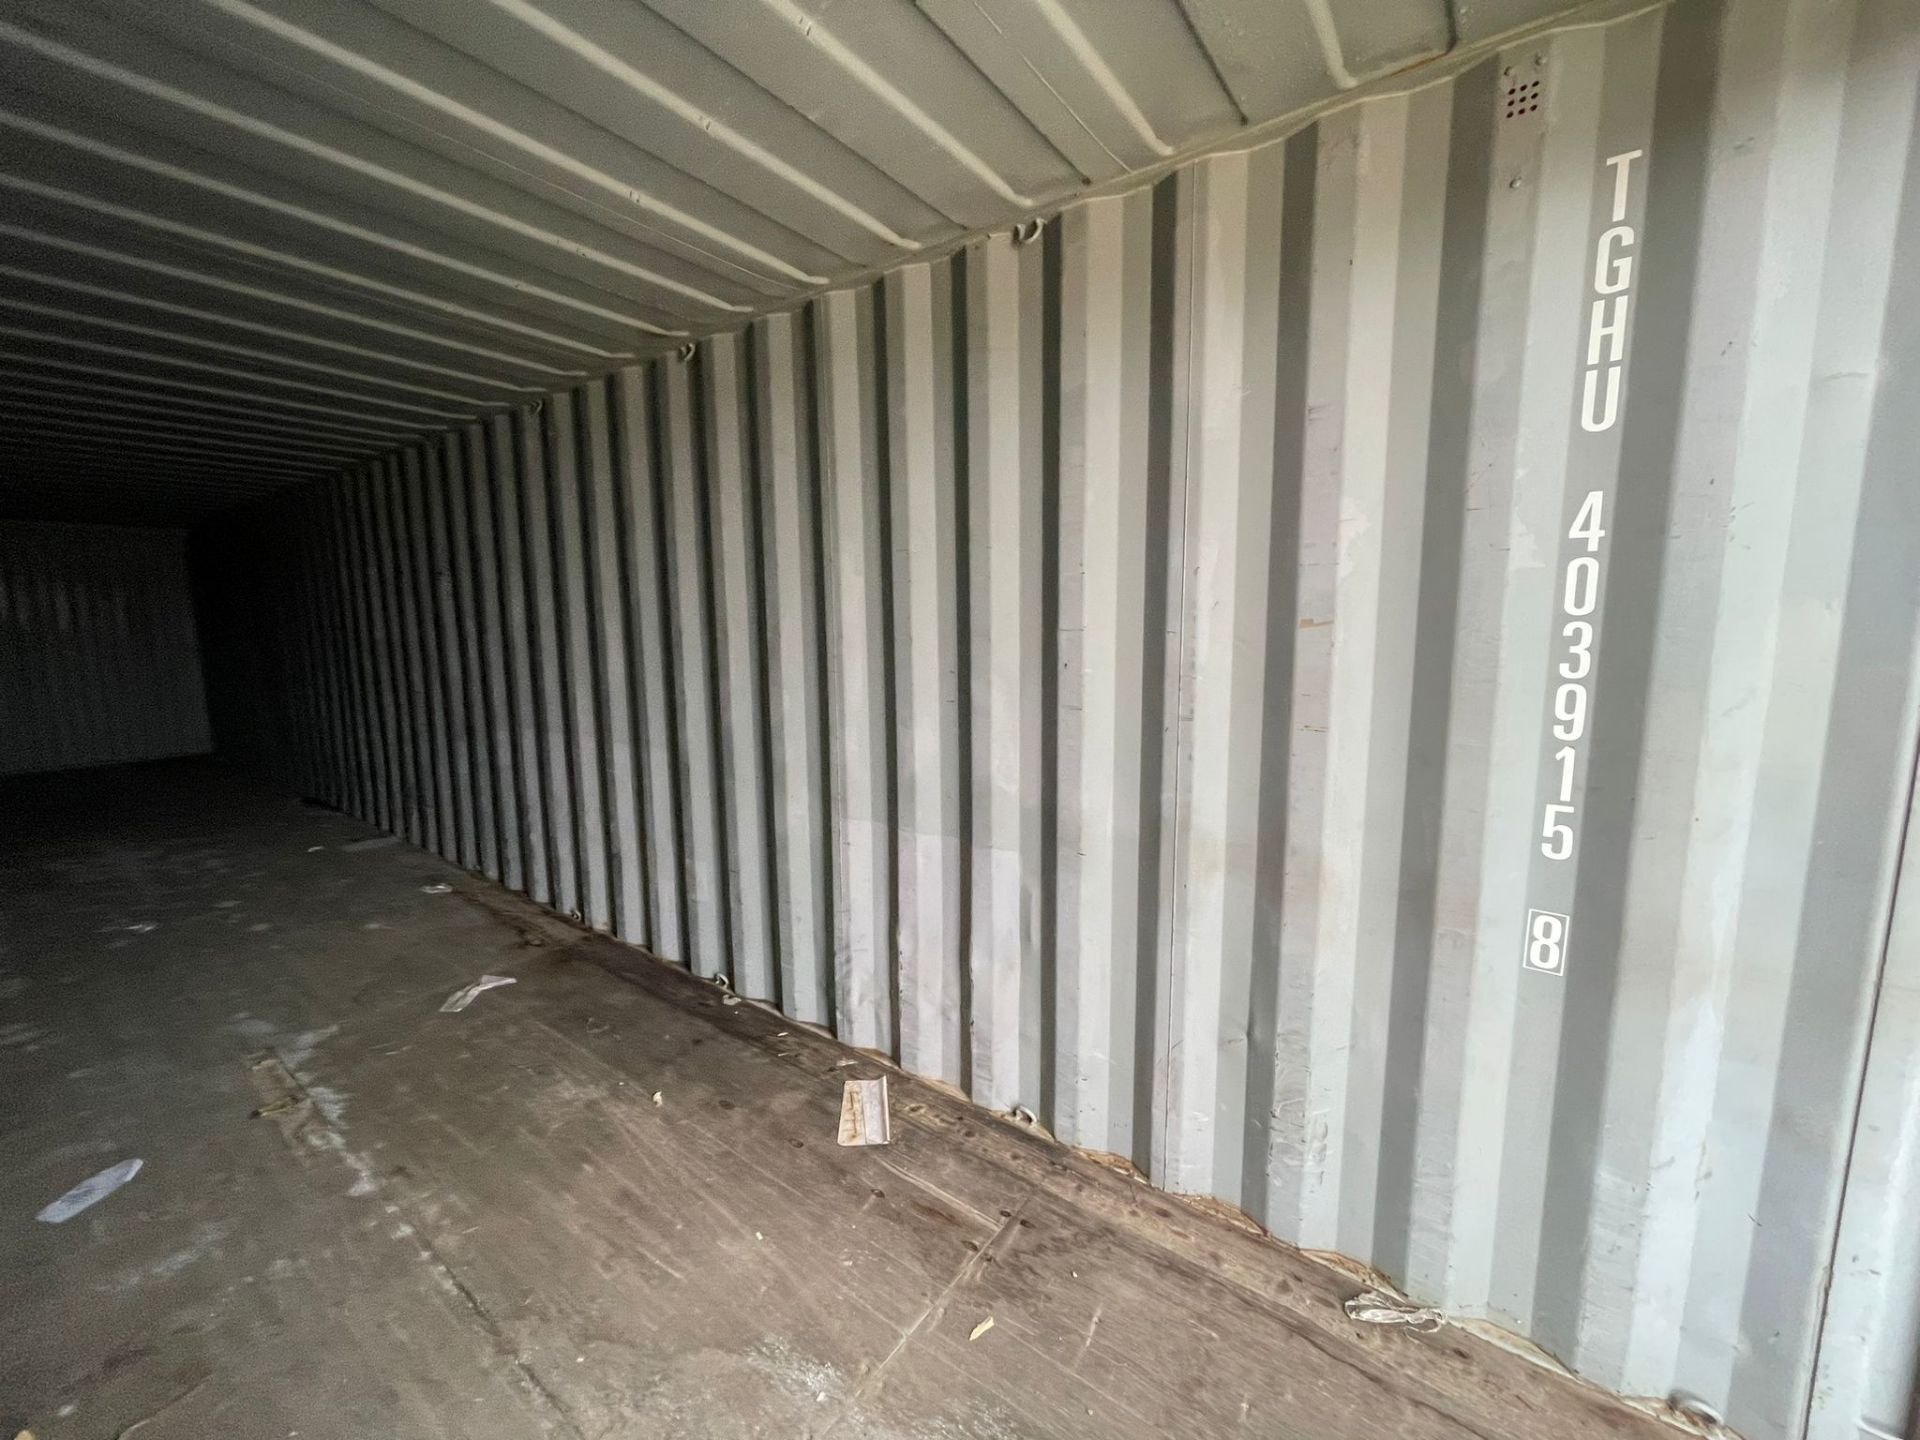 Shipping Container - ref TGHU4039158 - NO RESERVE (40’ GP - Standard) - Image 2 of 4